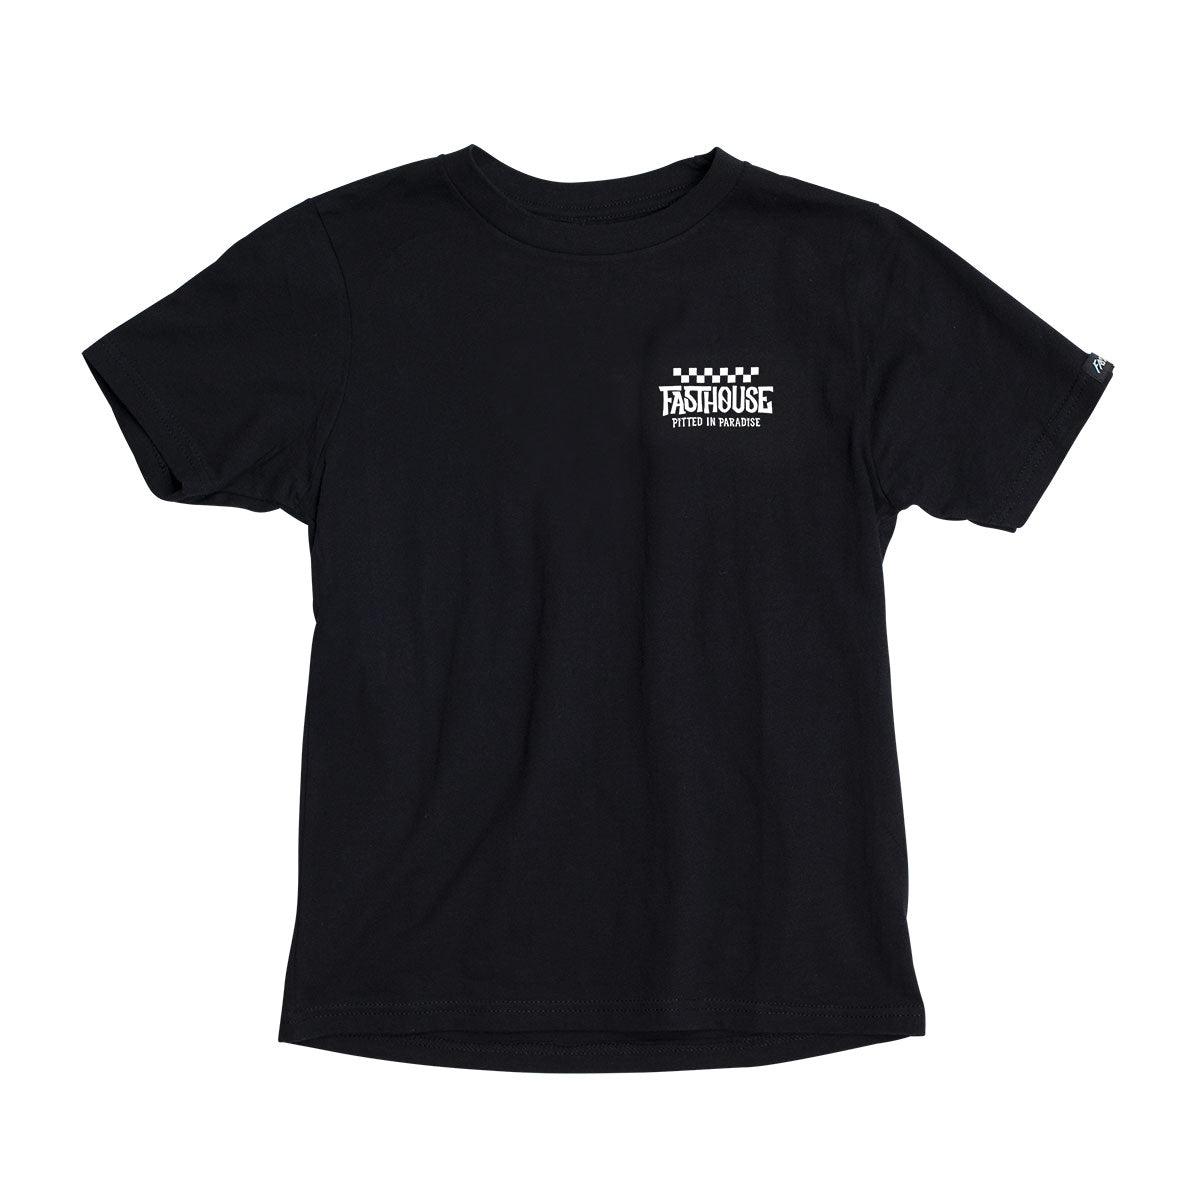 Pitted Youth Tee - Black